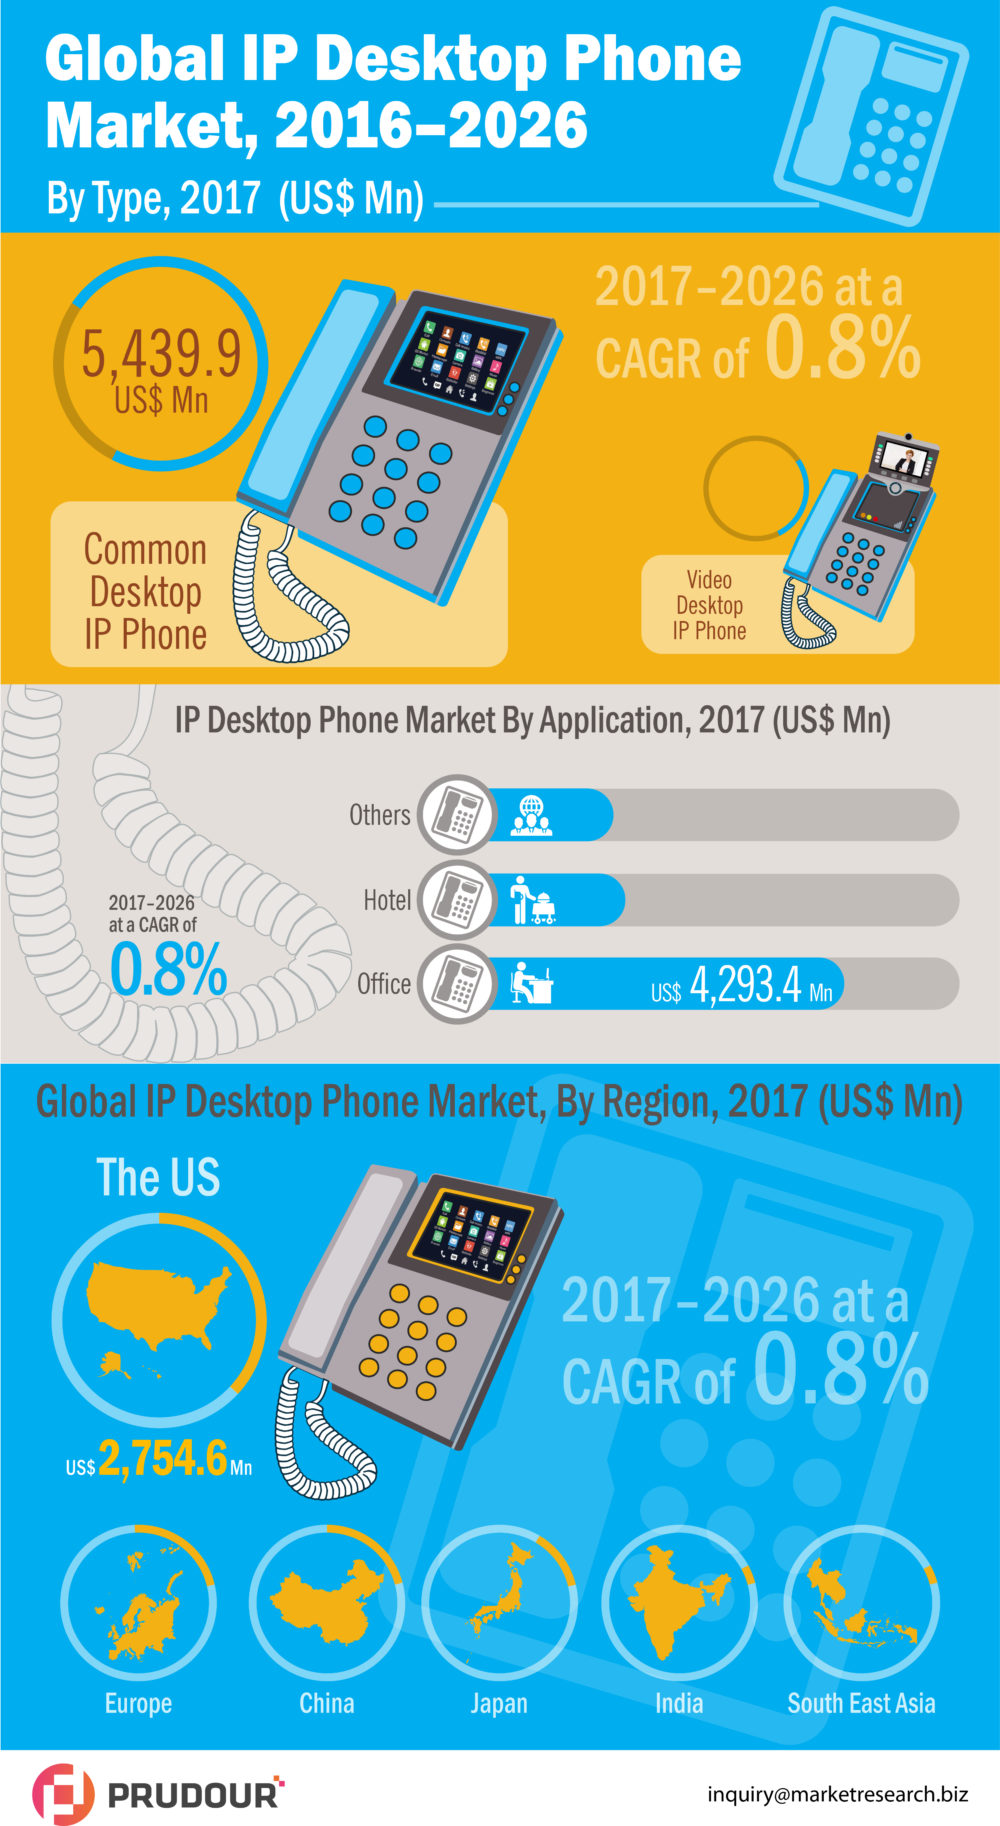 2026 US$ 27,585.3 Mn: Global Desktop IP Phone Market is expected to reach US$ 27,585.3 Mn in 2026